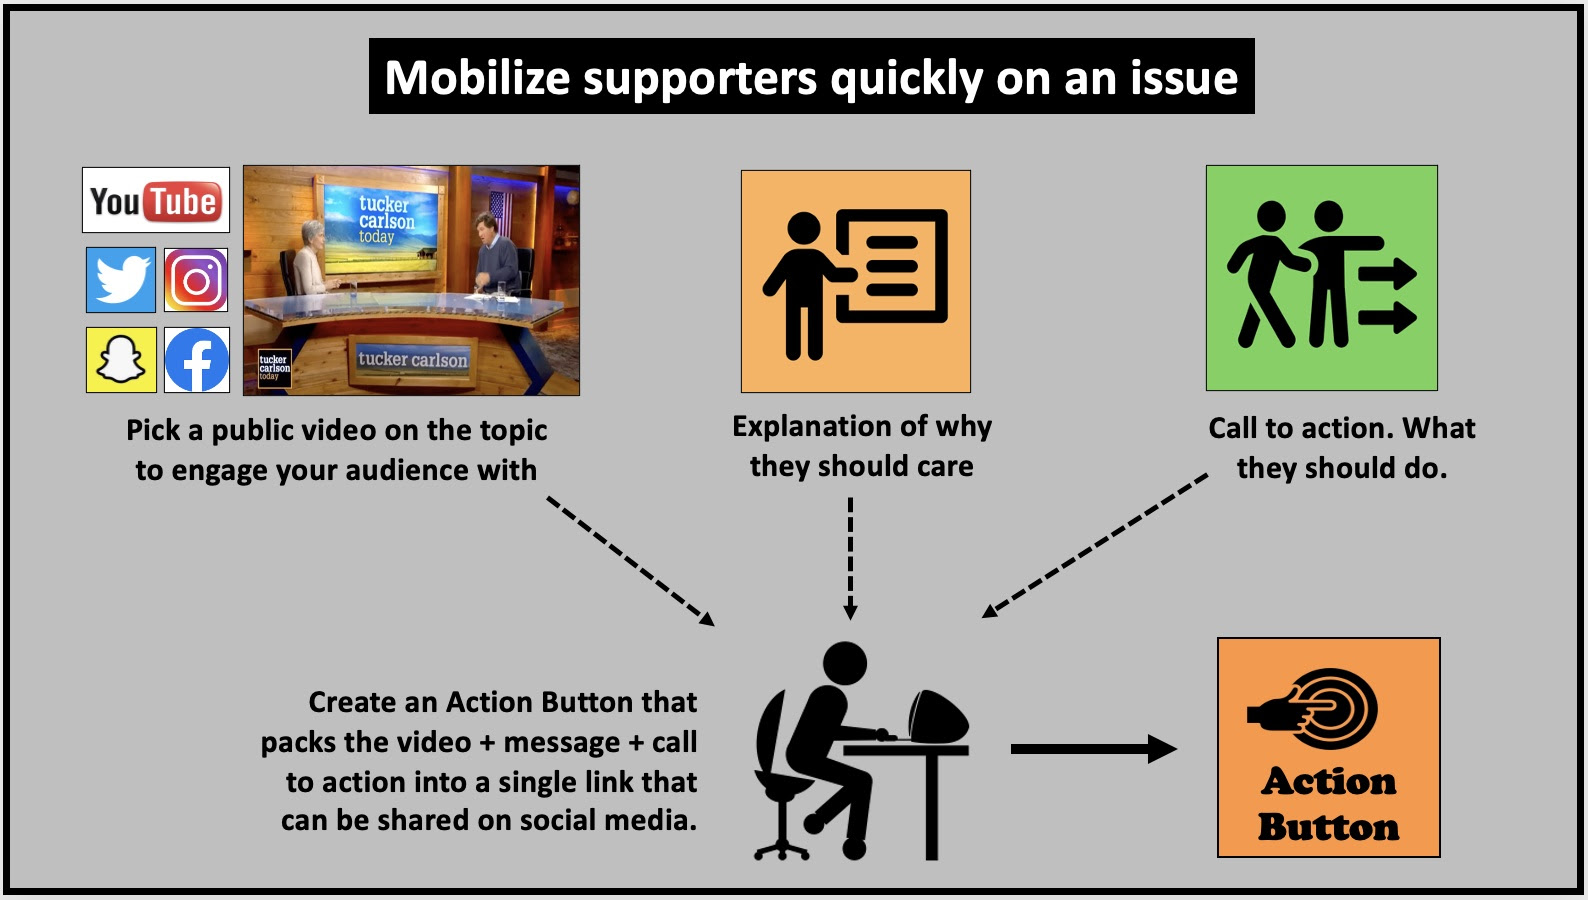 Use an Action Button to quickly mobilize support around an issue while it is still in the headlines